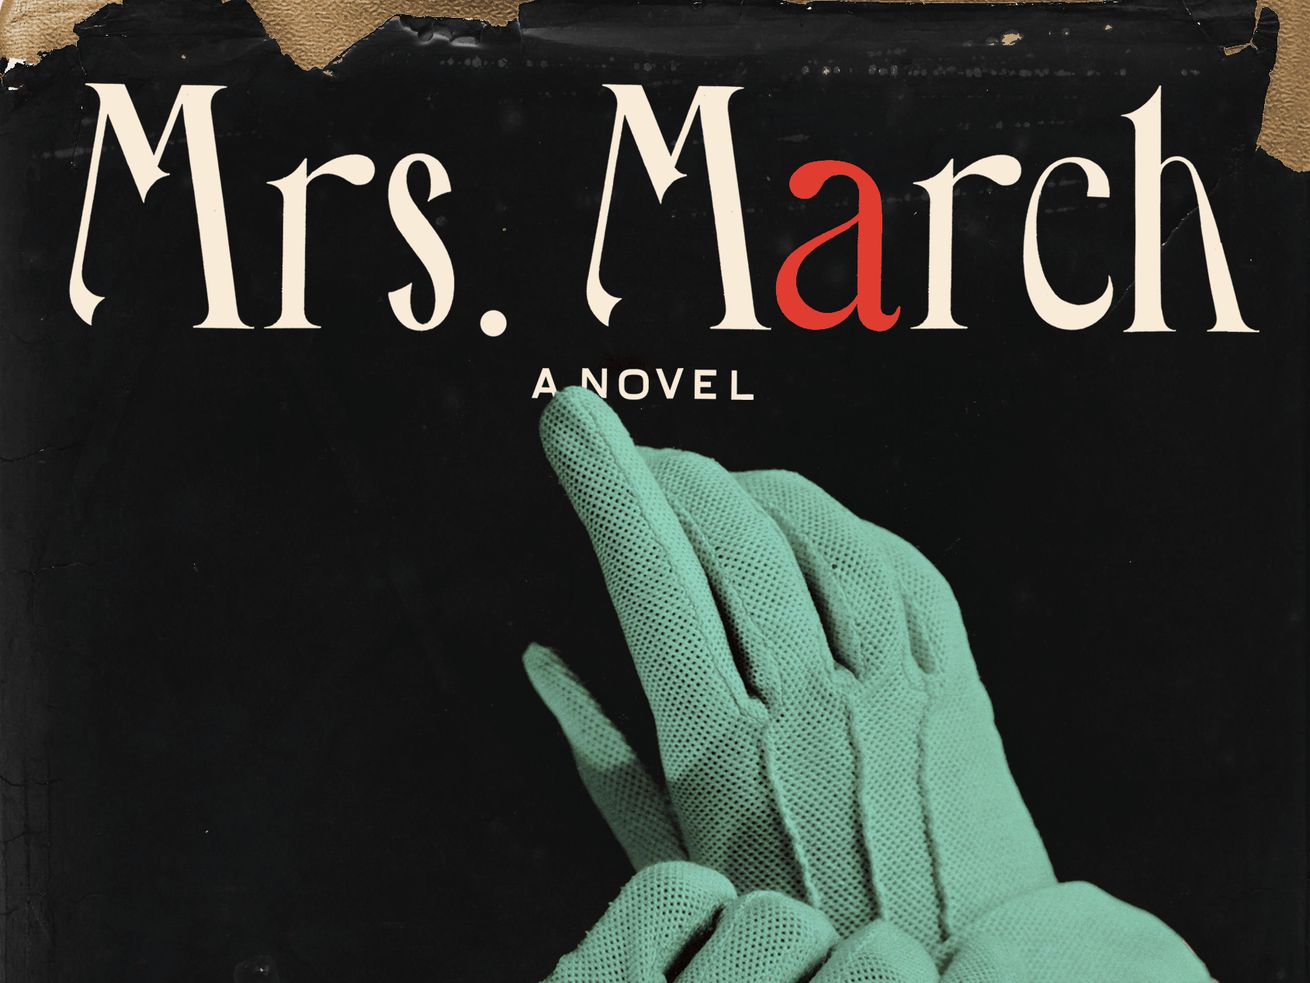 Mrs. March is a Hitchcock-meets-Highsmith novel about a woman behaving badly